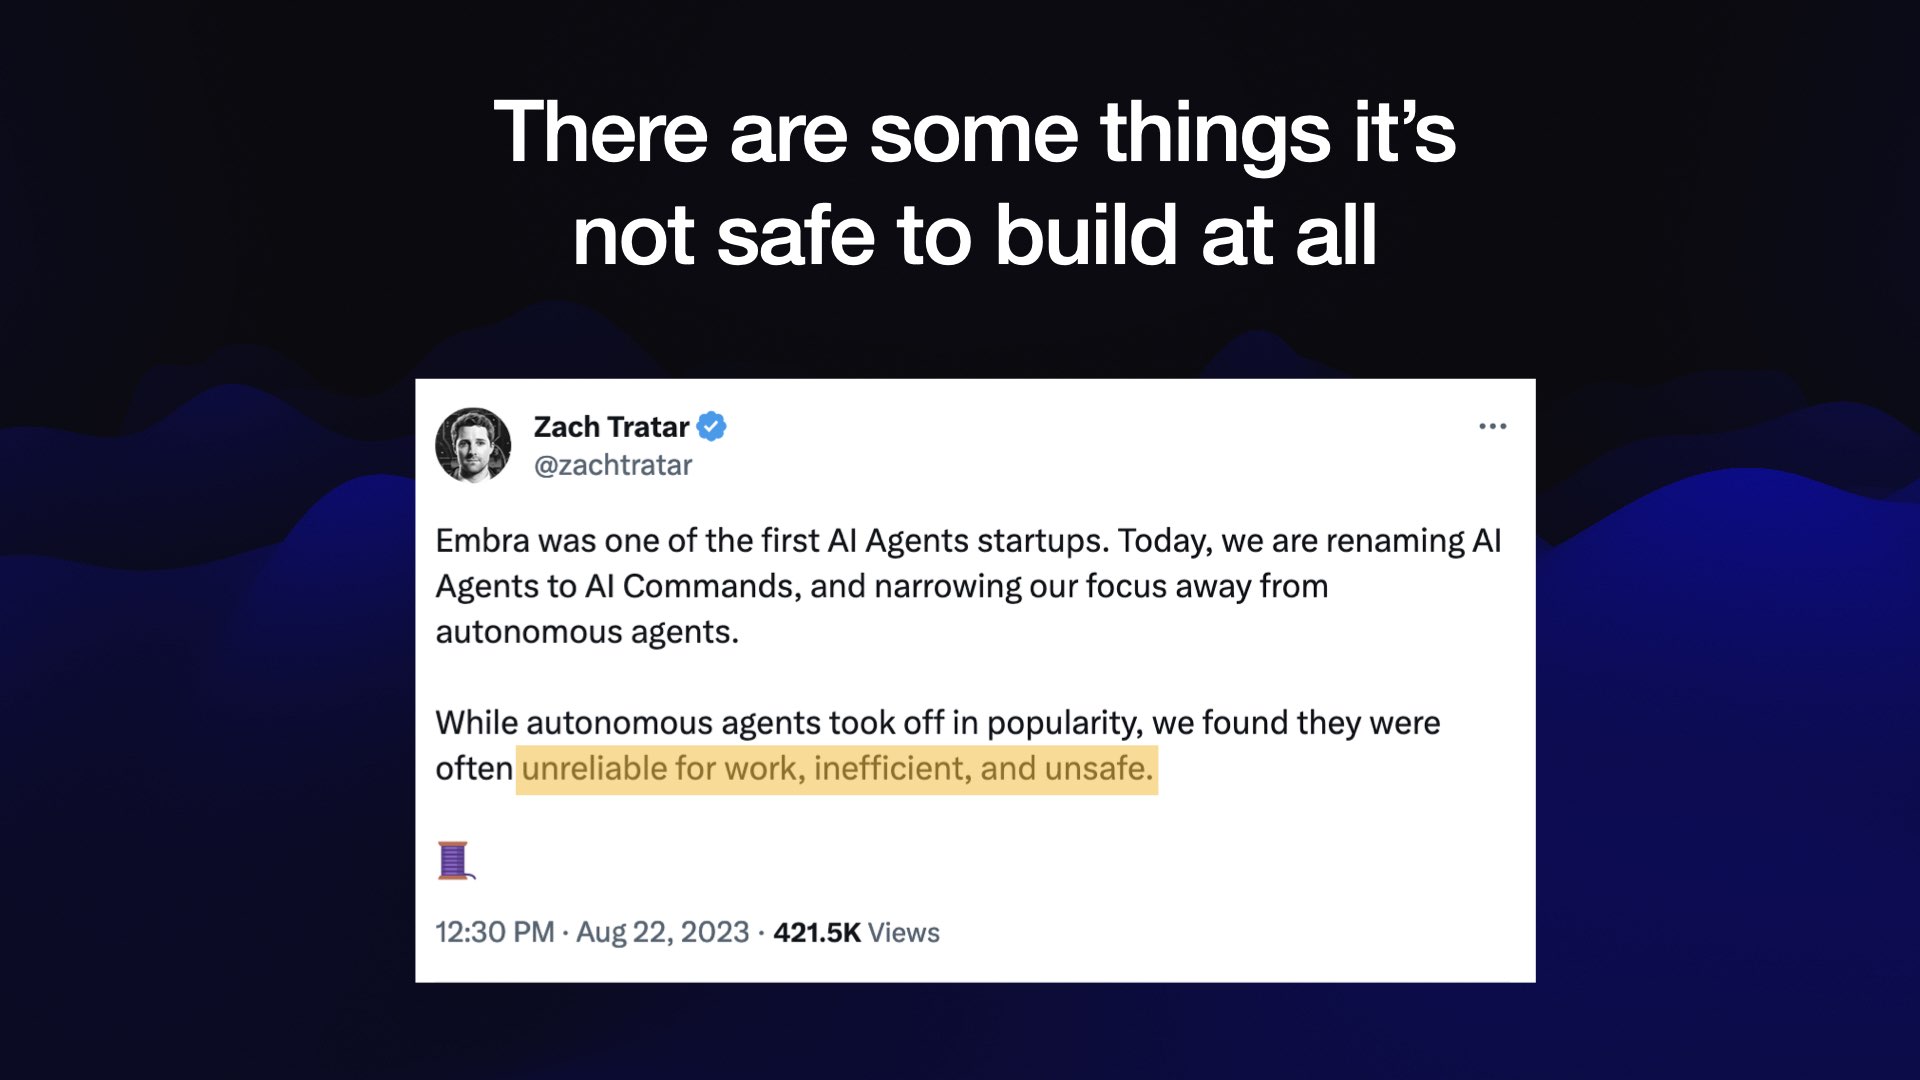 There are some things it’s not safe to build at all  Tweet from @zachtratar  Embra was one of the first AI Agents startups. Today, we are renaming AI Agents to AI Commands, and narrowing our focus away from autonomous agents.  While autonomous agents took off in popularity, we found they were often unreliable for work, inefficient, and unsafe.  Aug 22, 2023 - 421.5K Views 